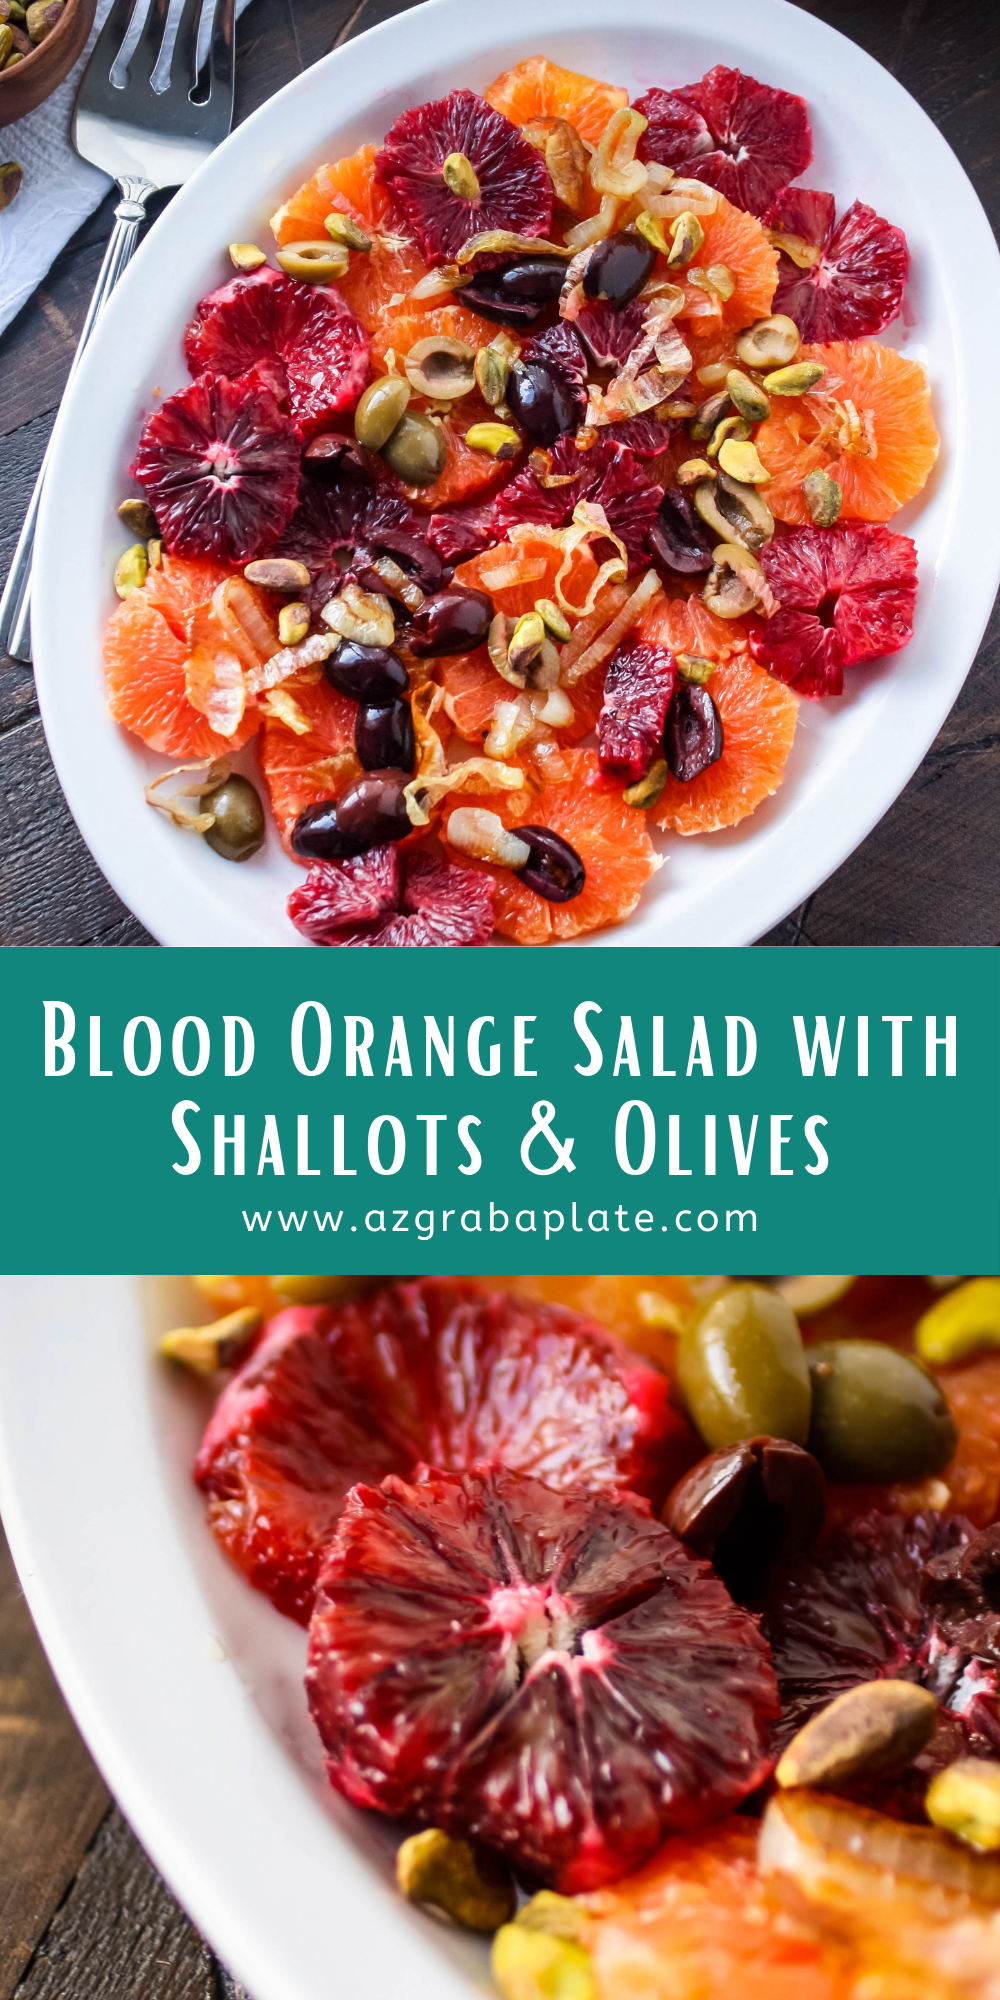 Blood Orange Salad with Shallots & Olives is a vibrant and tasty simple salad.